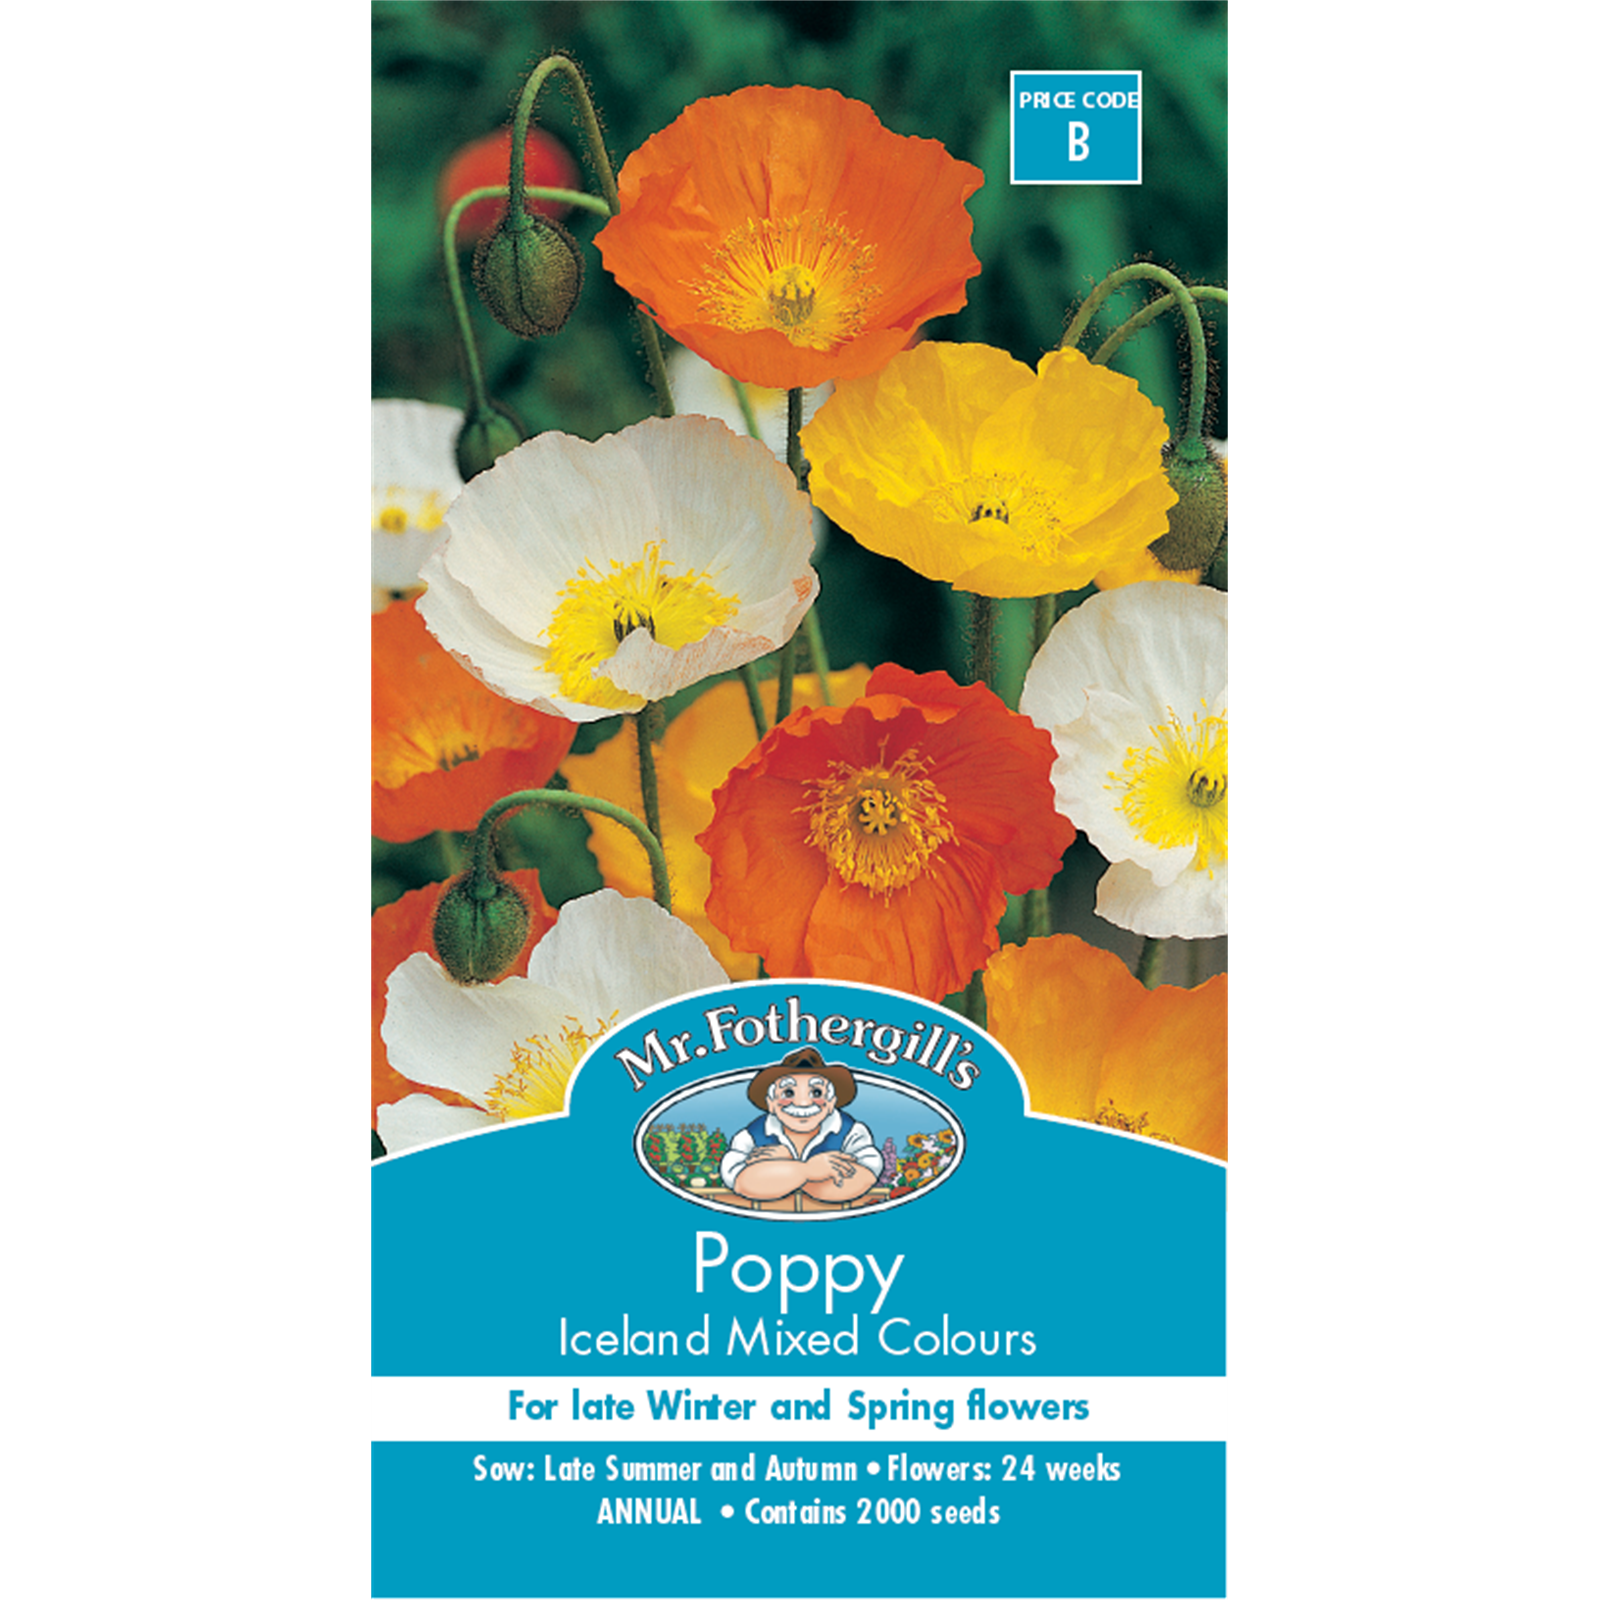 Mr Fothergill's Poppy Iceland Mixed Flower Seeds